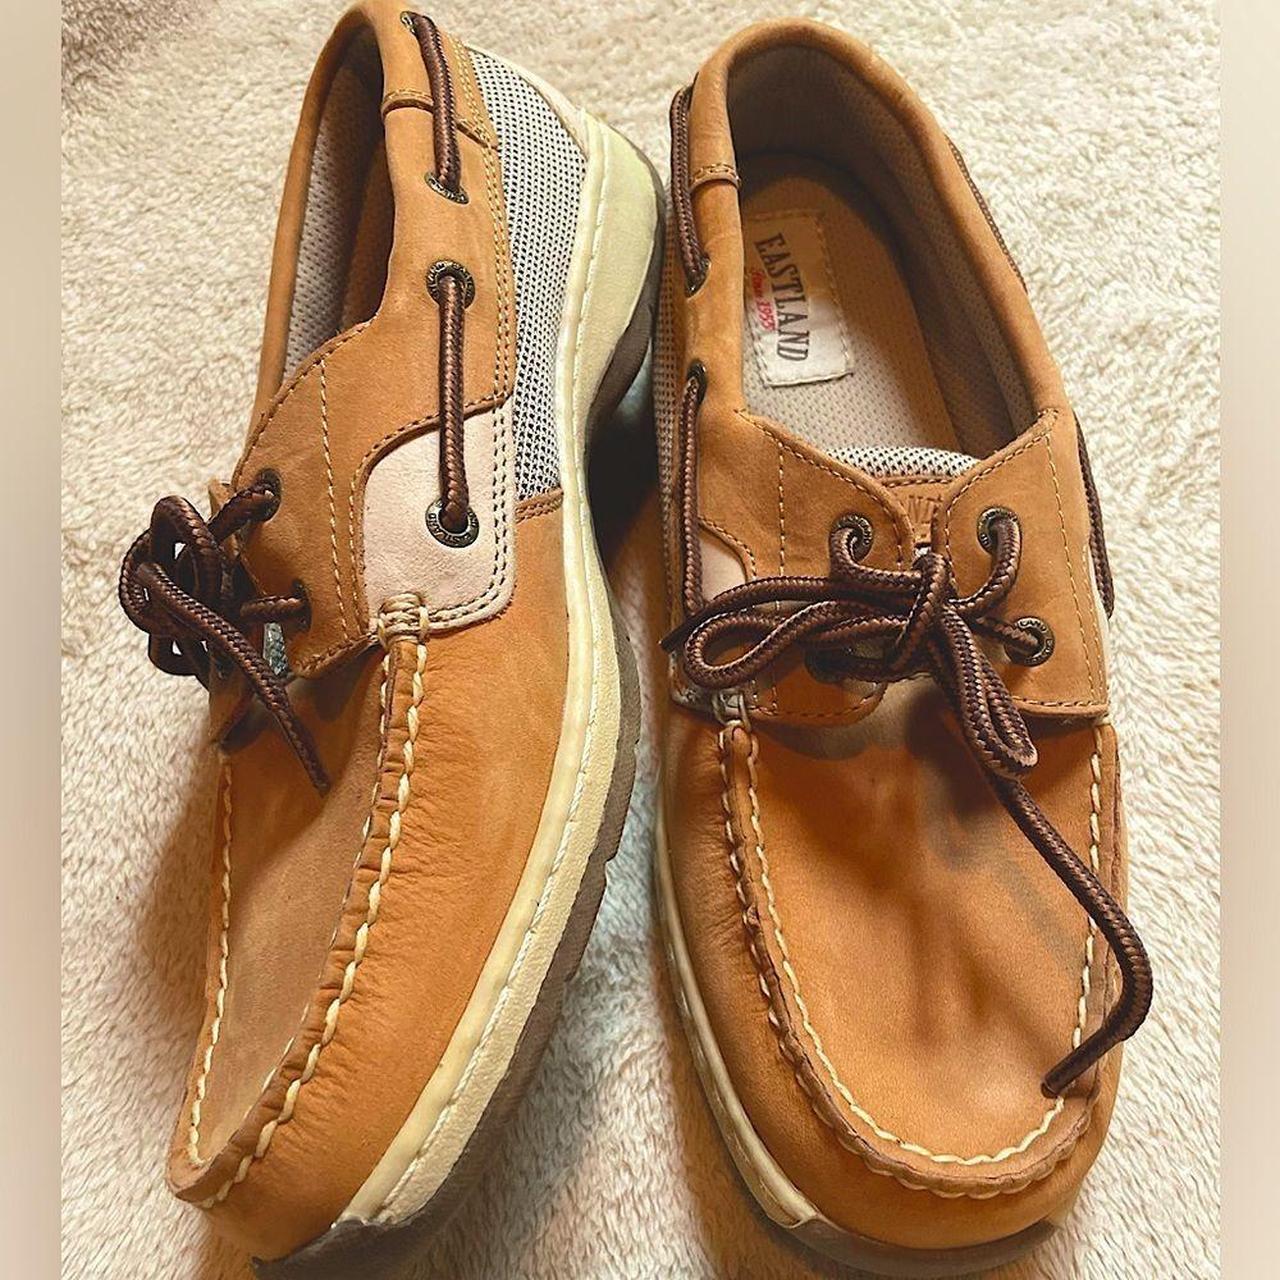 Eastland Women's Cream and Tan Boat-shoes (3)